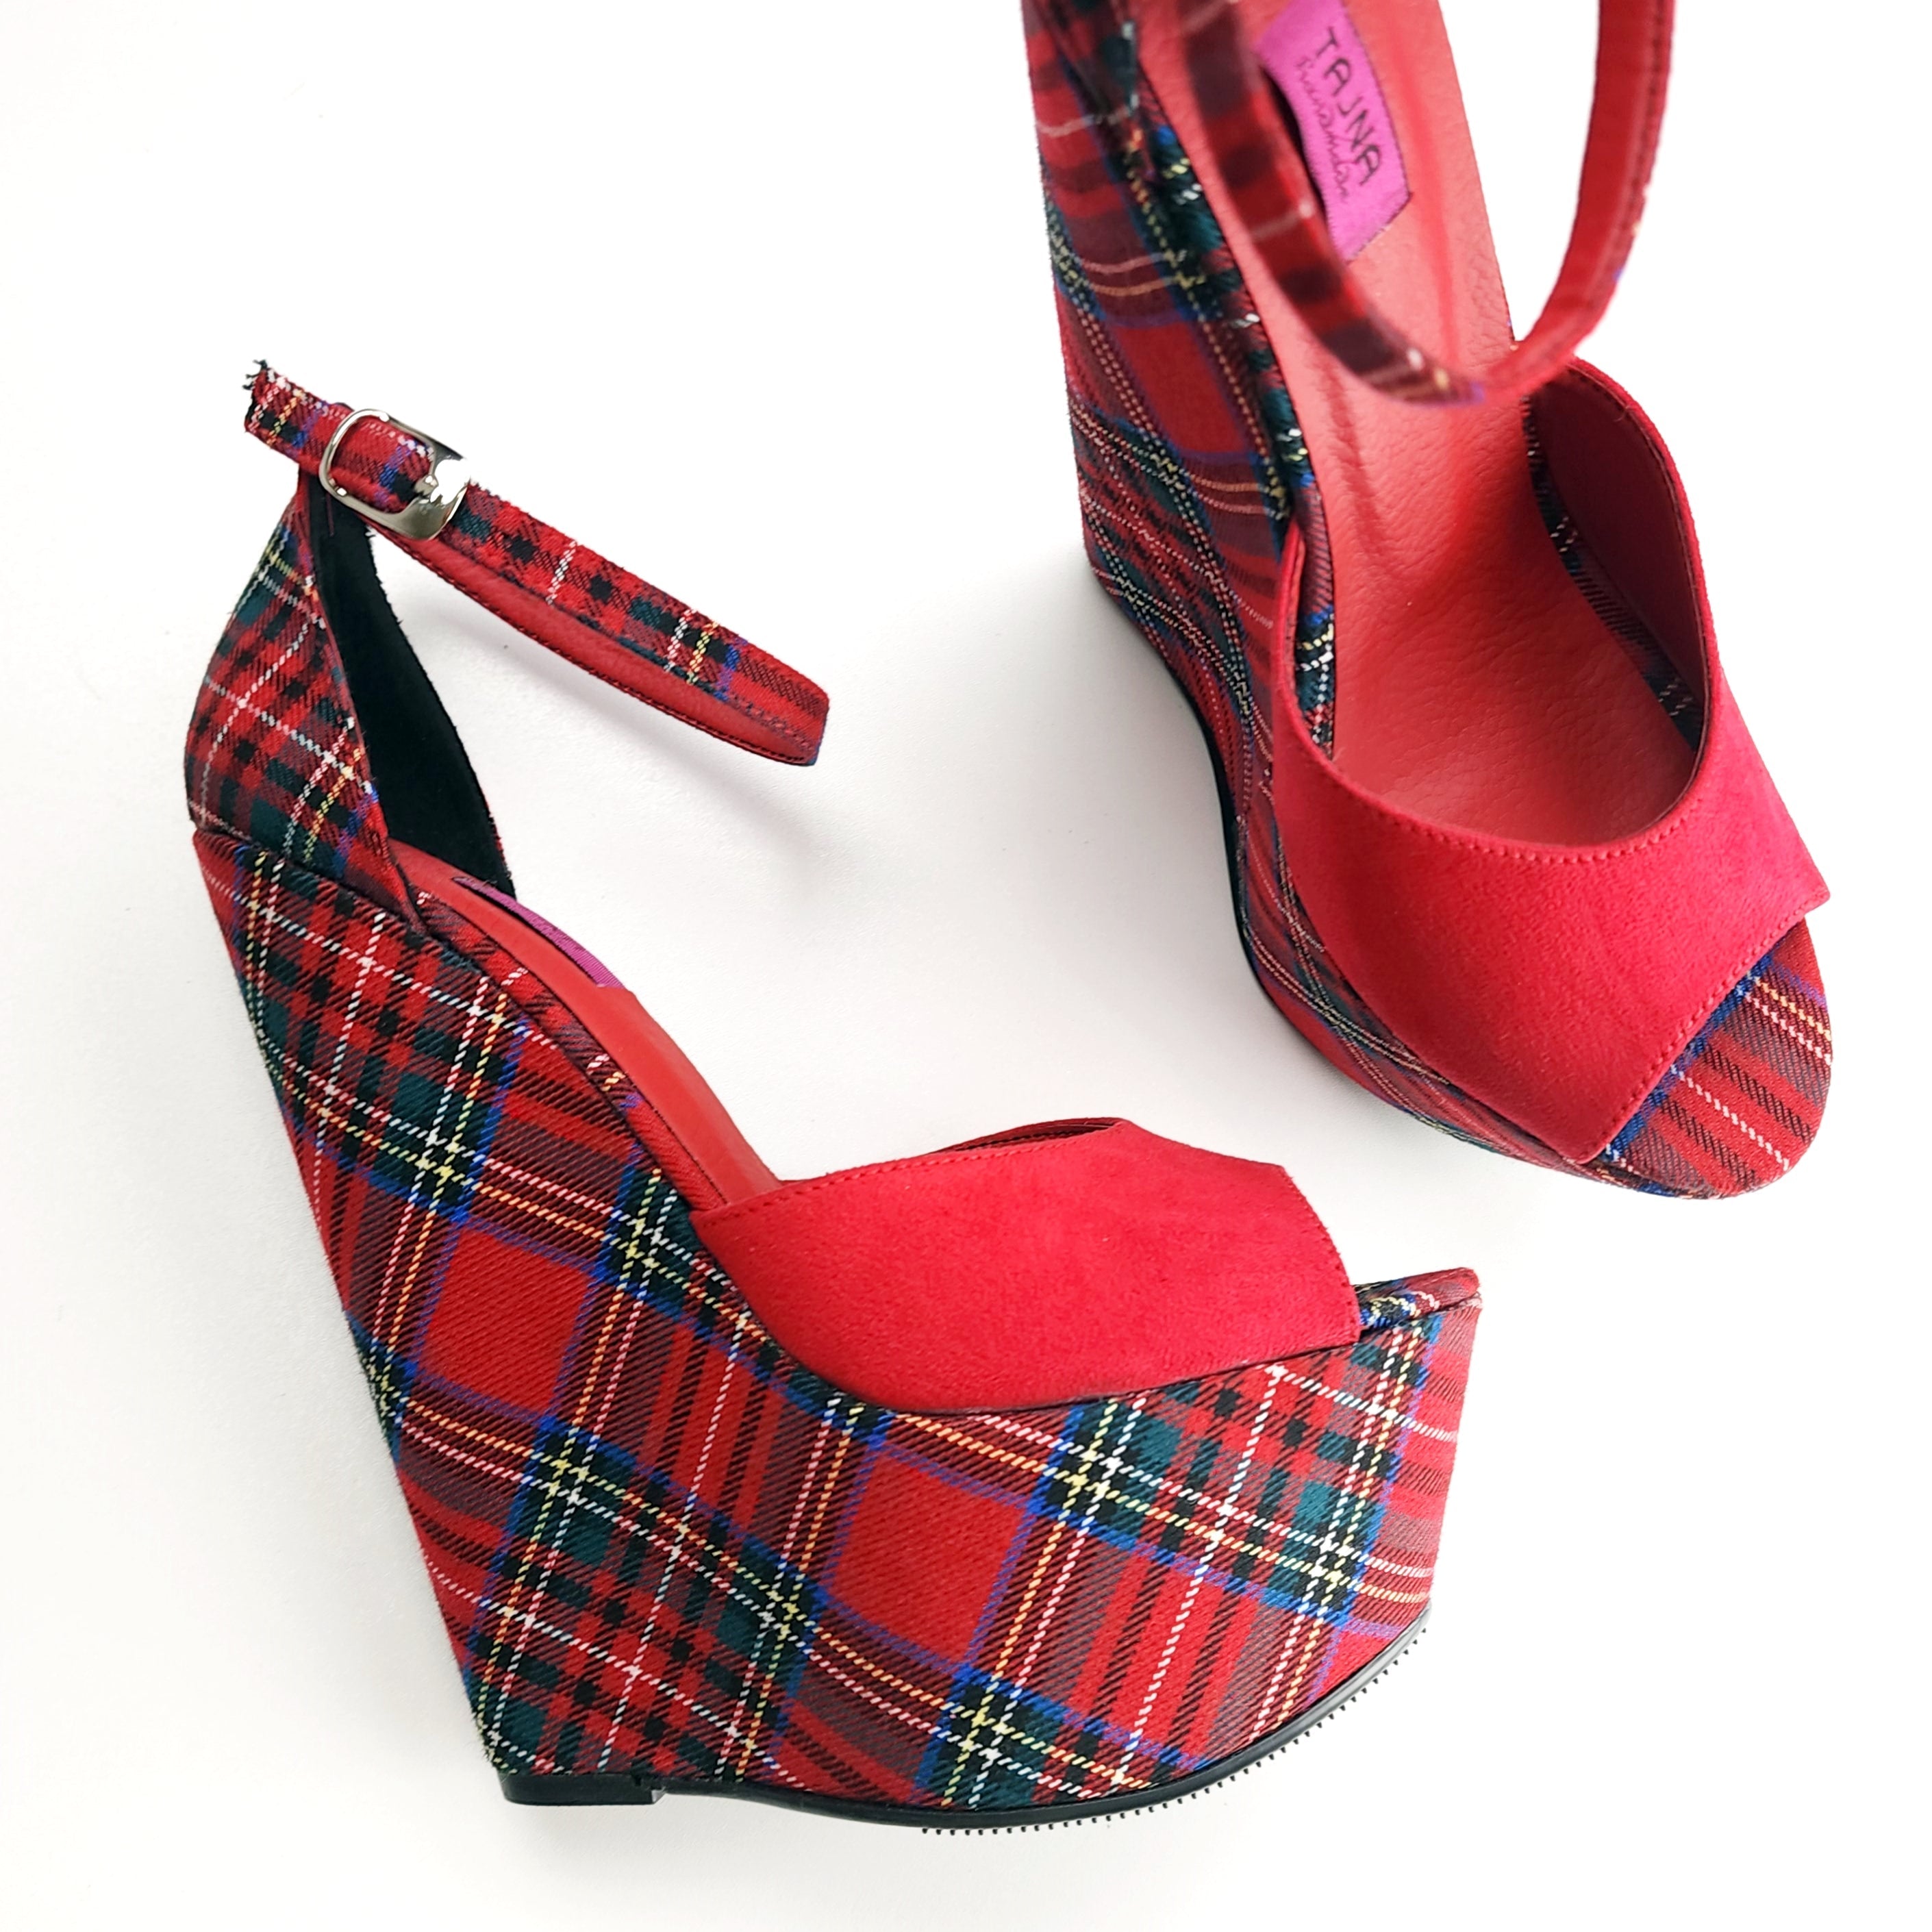 Tartan Red Suede Ankle Strap Wedge Sandals Ankle Strap Tajna Club Shoe